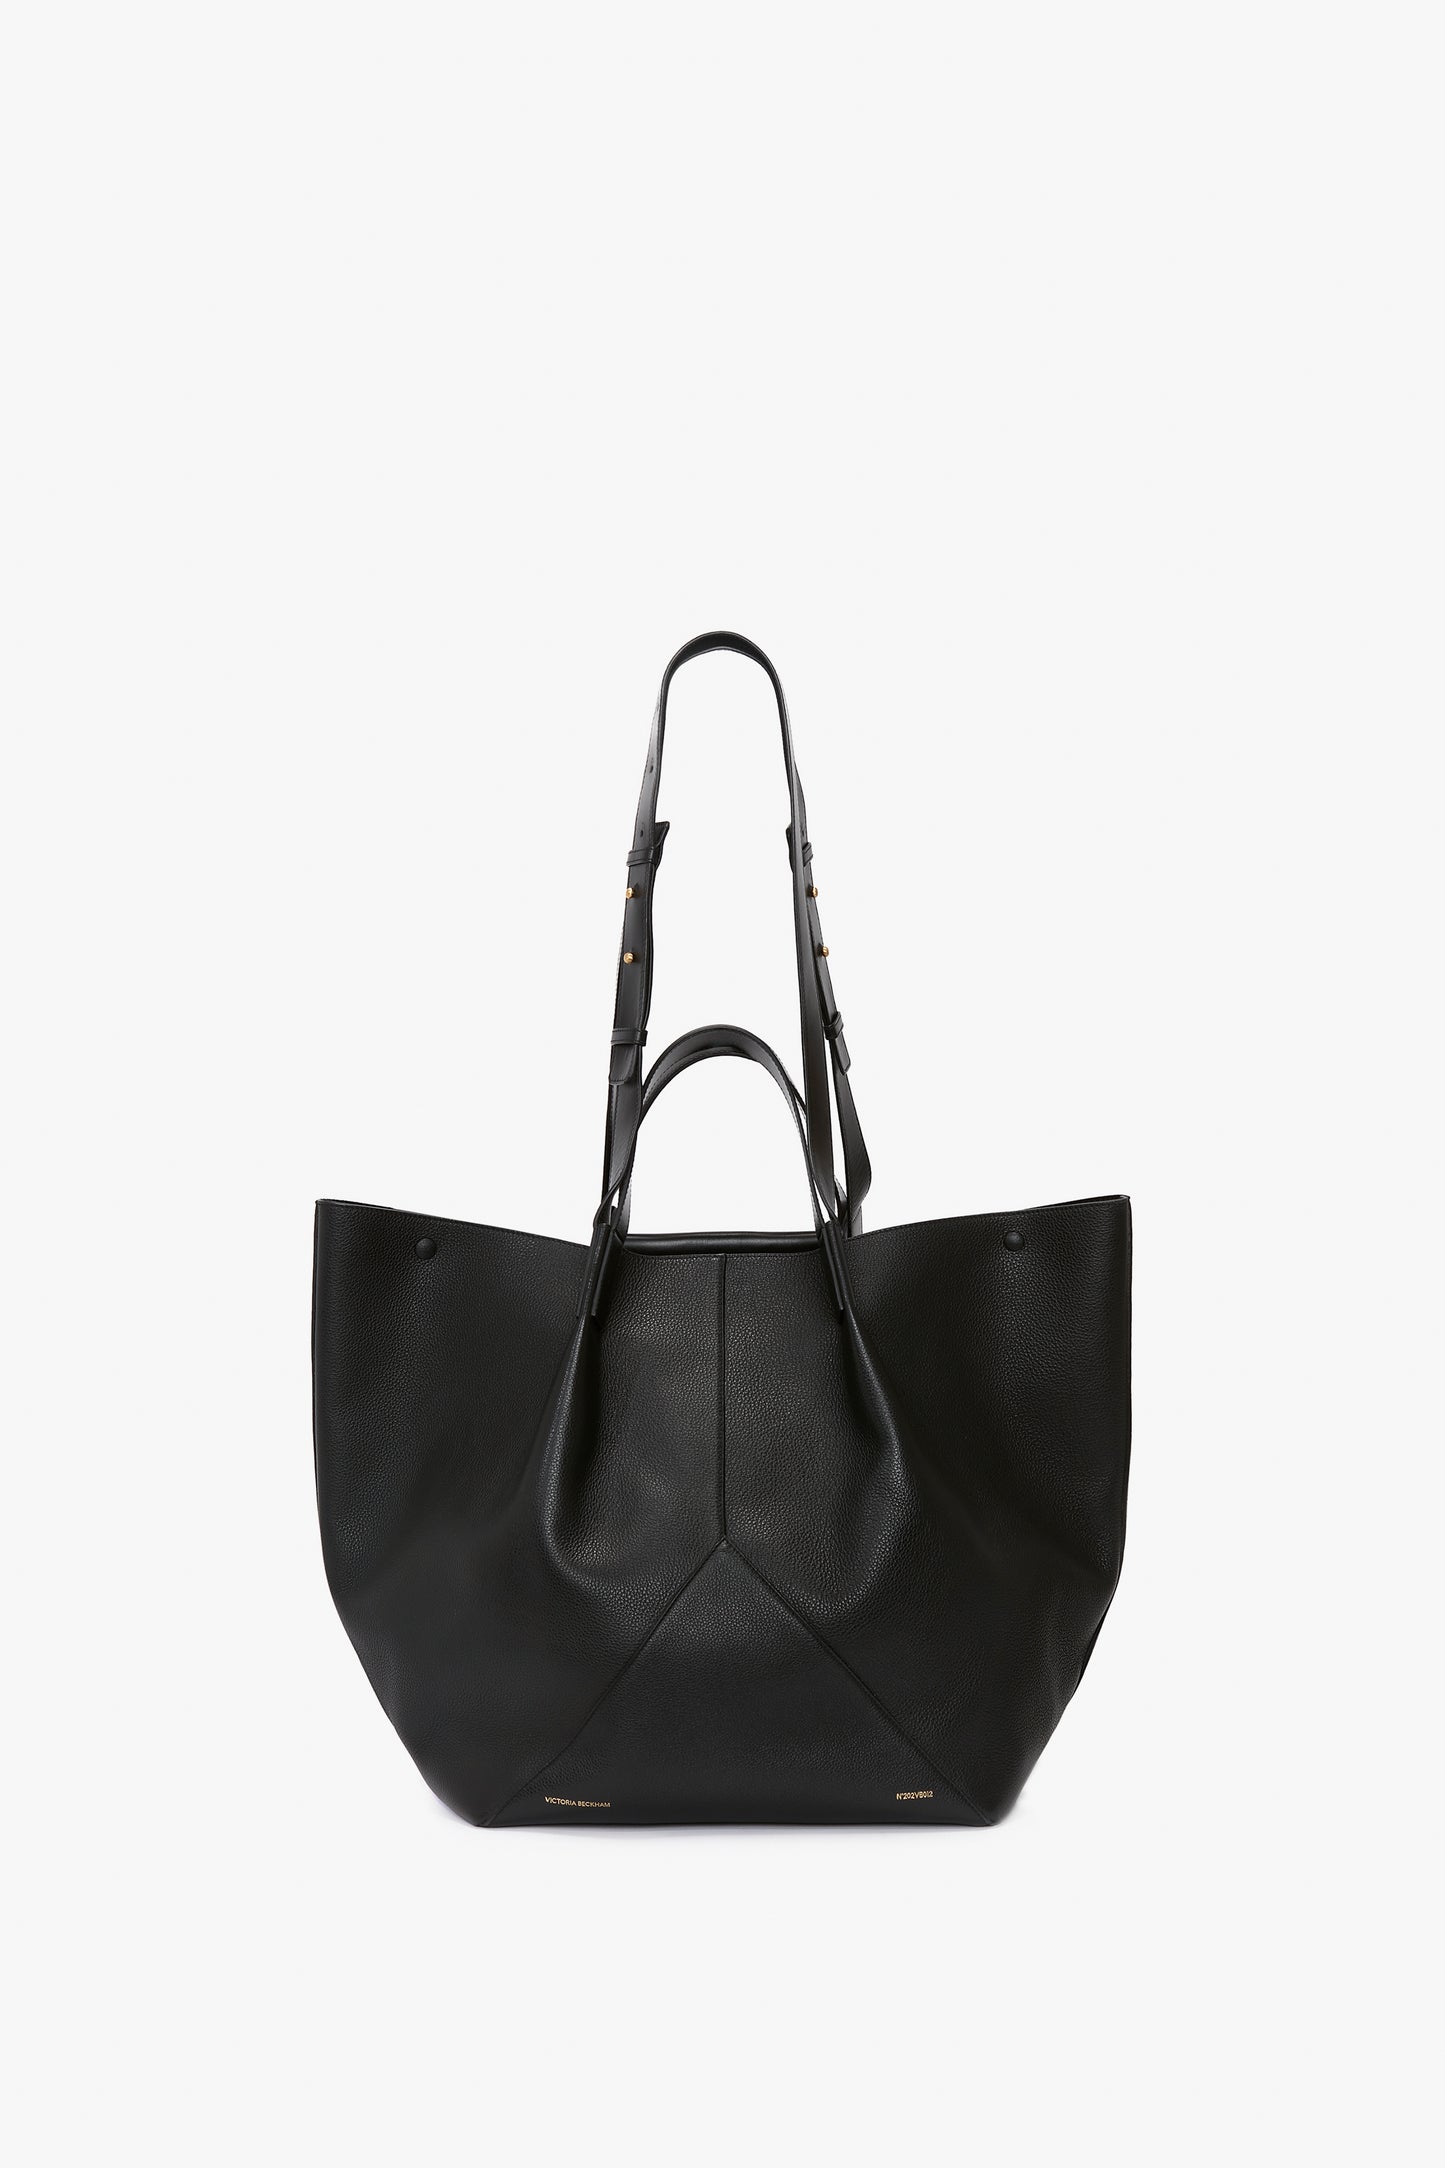 The Jumbo Tote In Black Leather